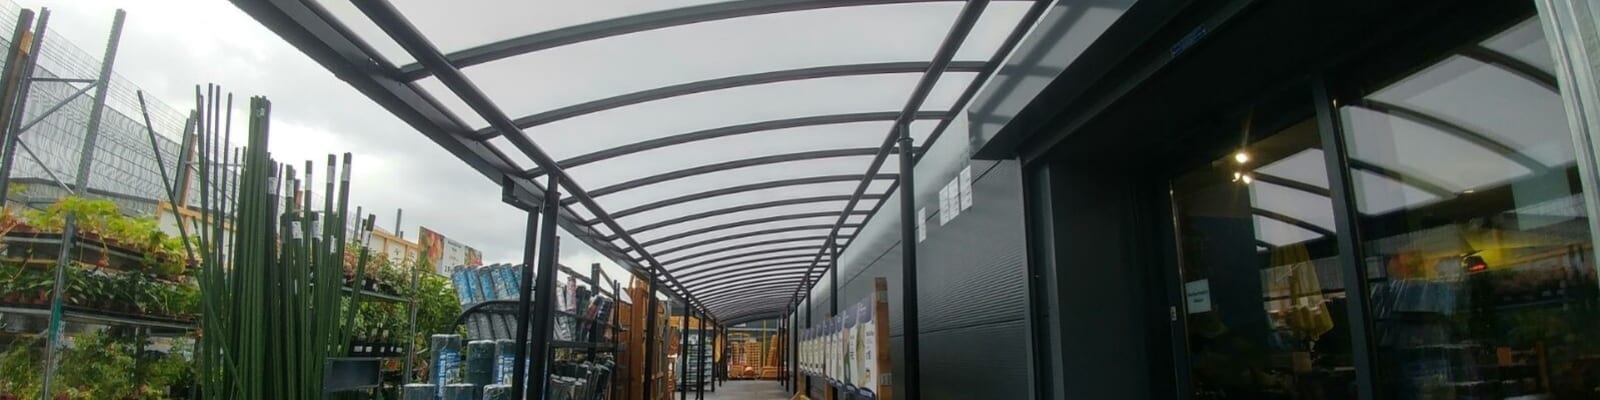 Taskers Home Store Covered Walkway